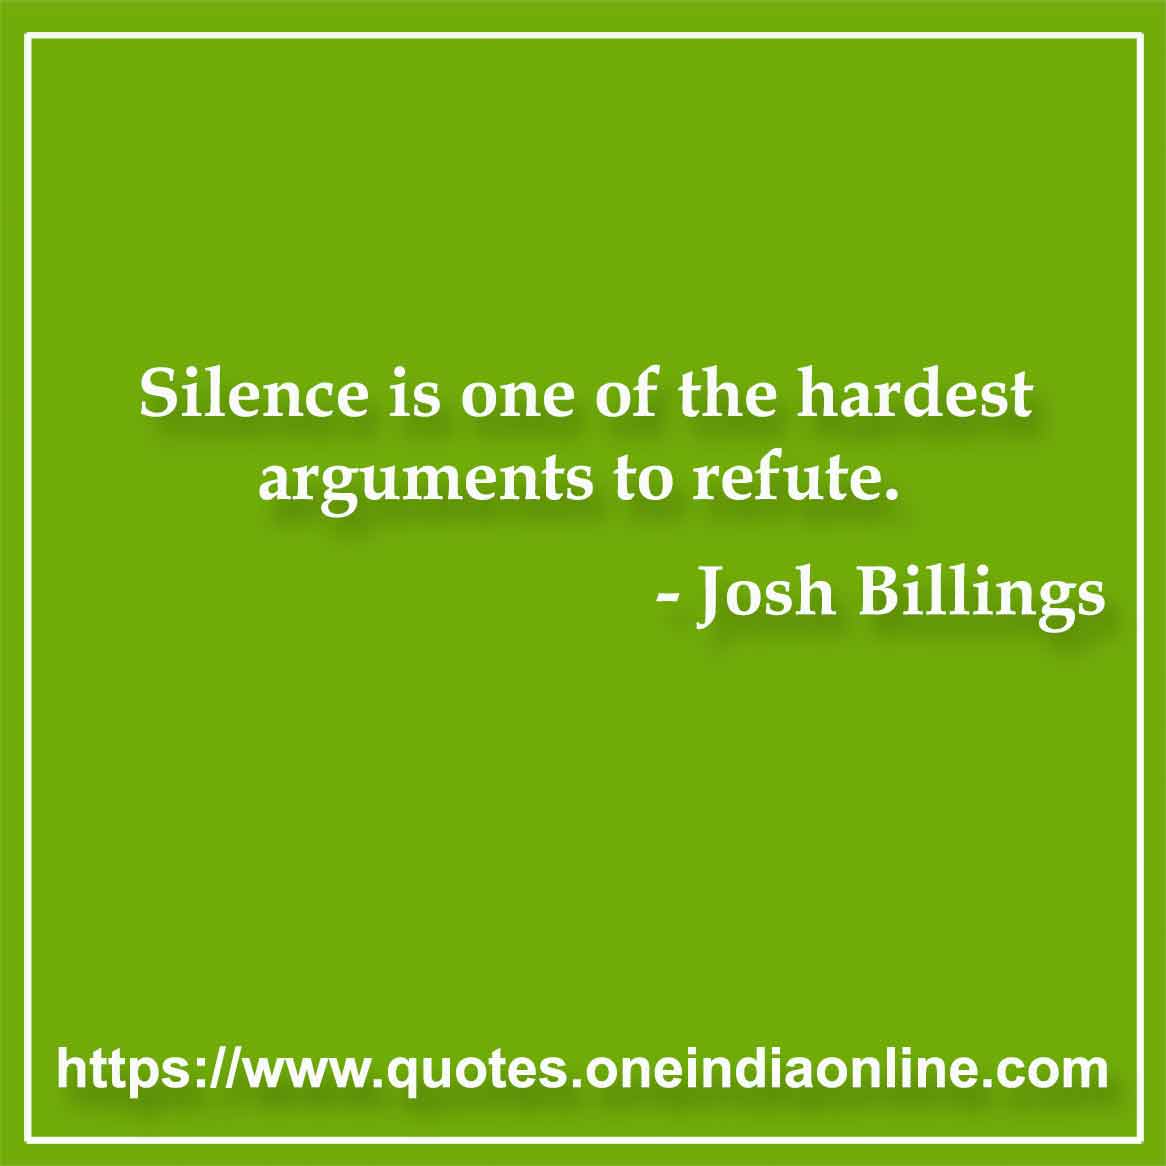 Silence is one of the hardest arguments to refute.

- Silence Quotes by Josh Billings 